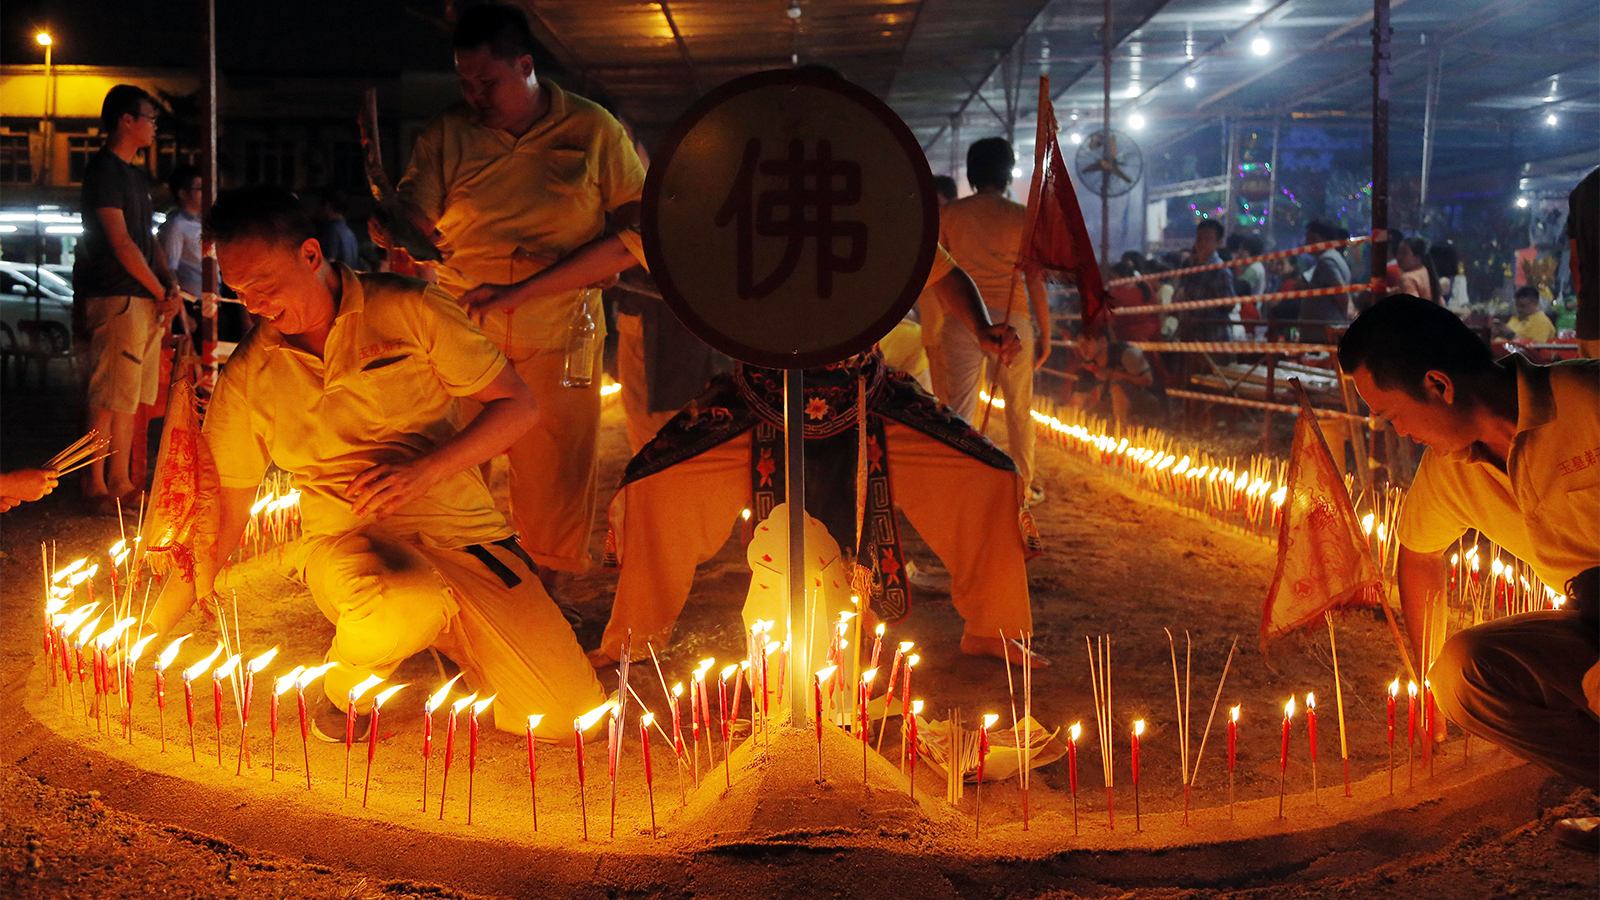 Malaysia Hungry Ghost Festival - Religion News Service